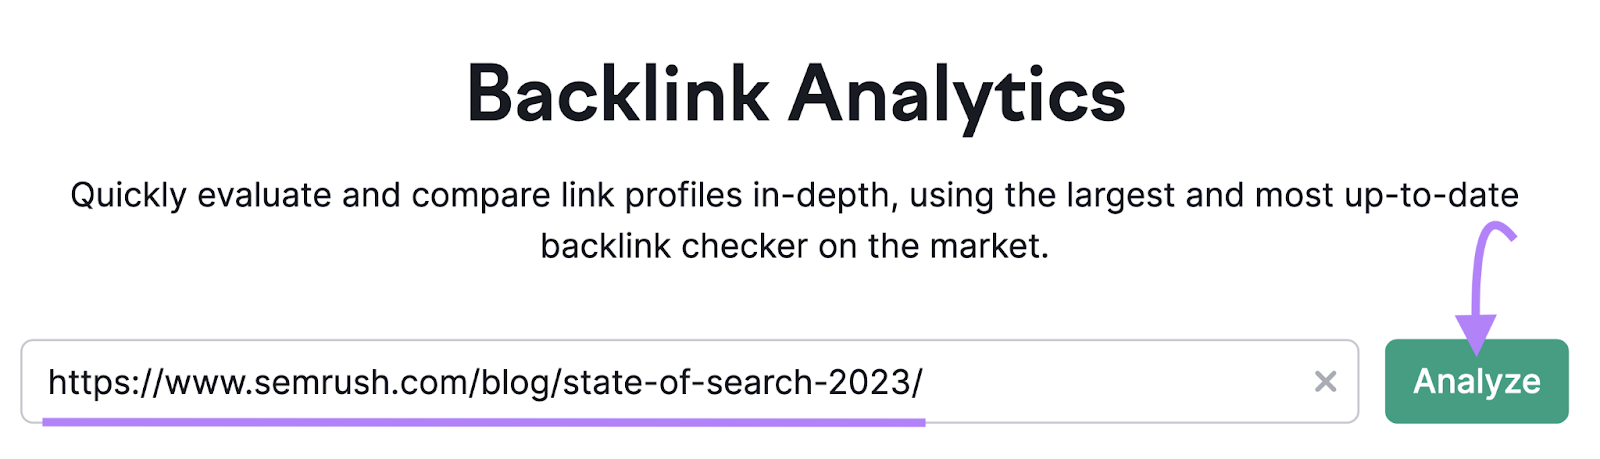 Backlink Analytics search bar with "Analyze" button highlighted